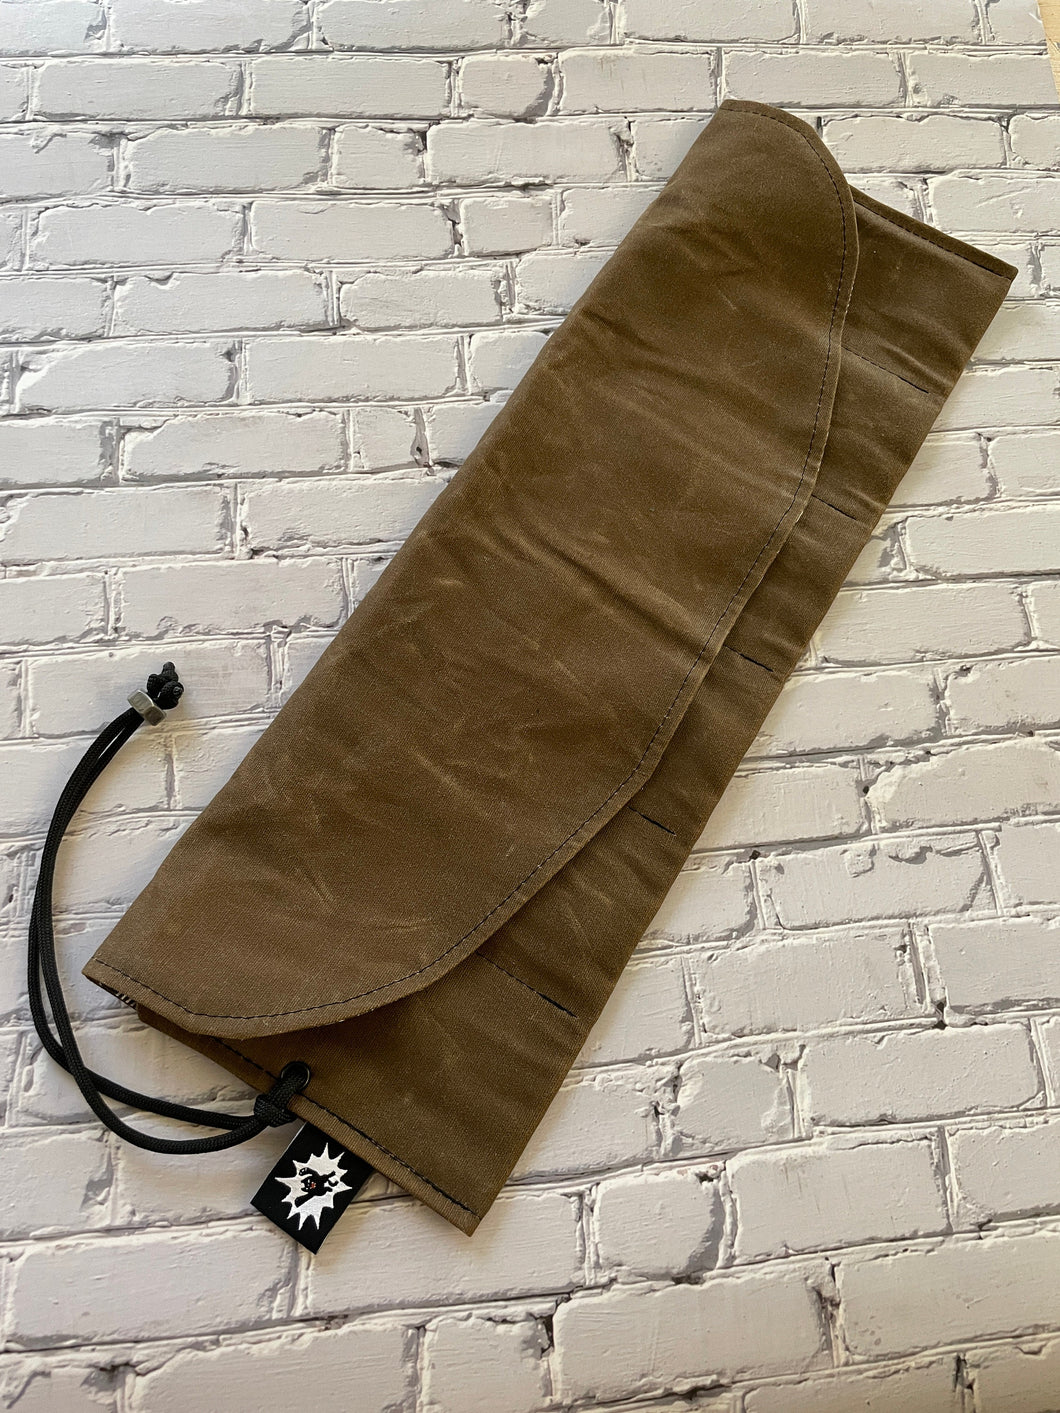 EDC Tool Roll | Waxed Canvas Pouch |Every Day Carry Gear Bag |Pocket Organizer | EDC Knife Roll | Pocket Dump Display Hank | Wave Six Pack